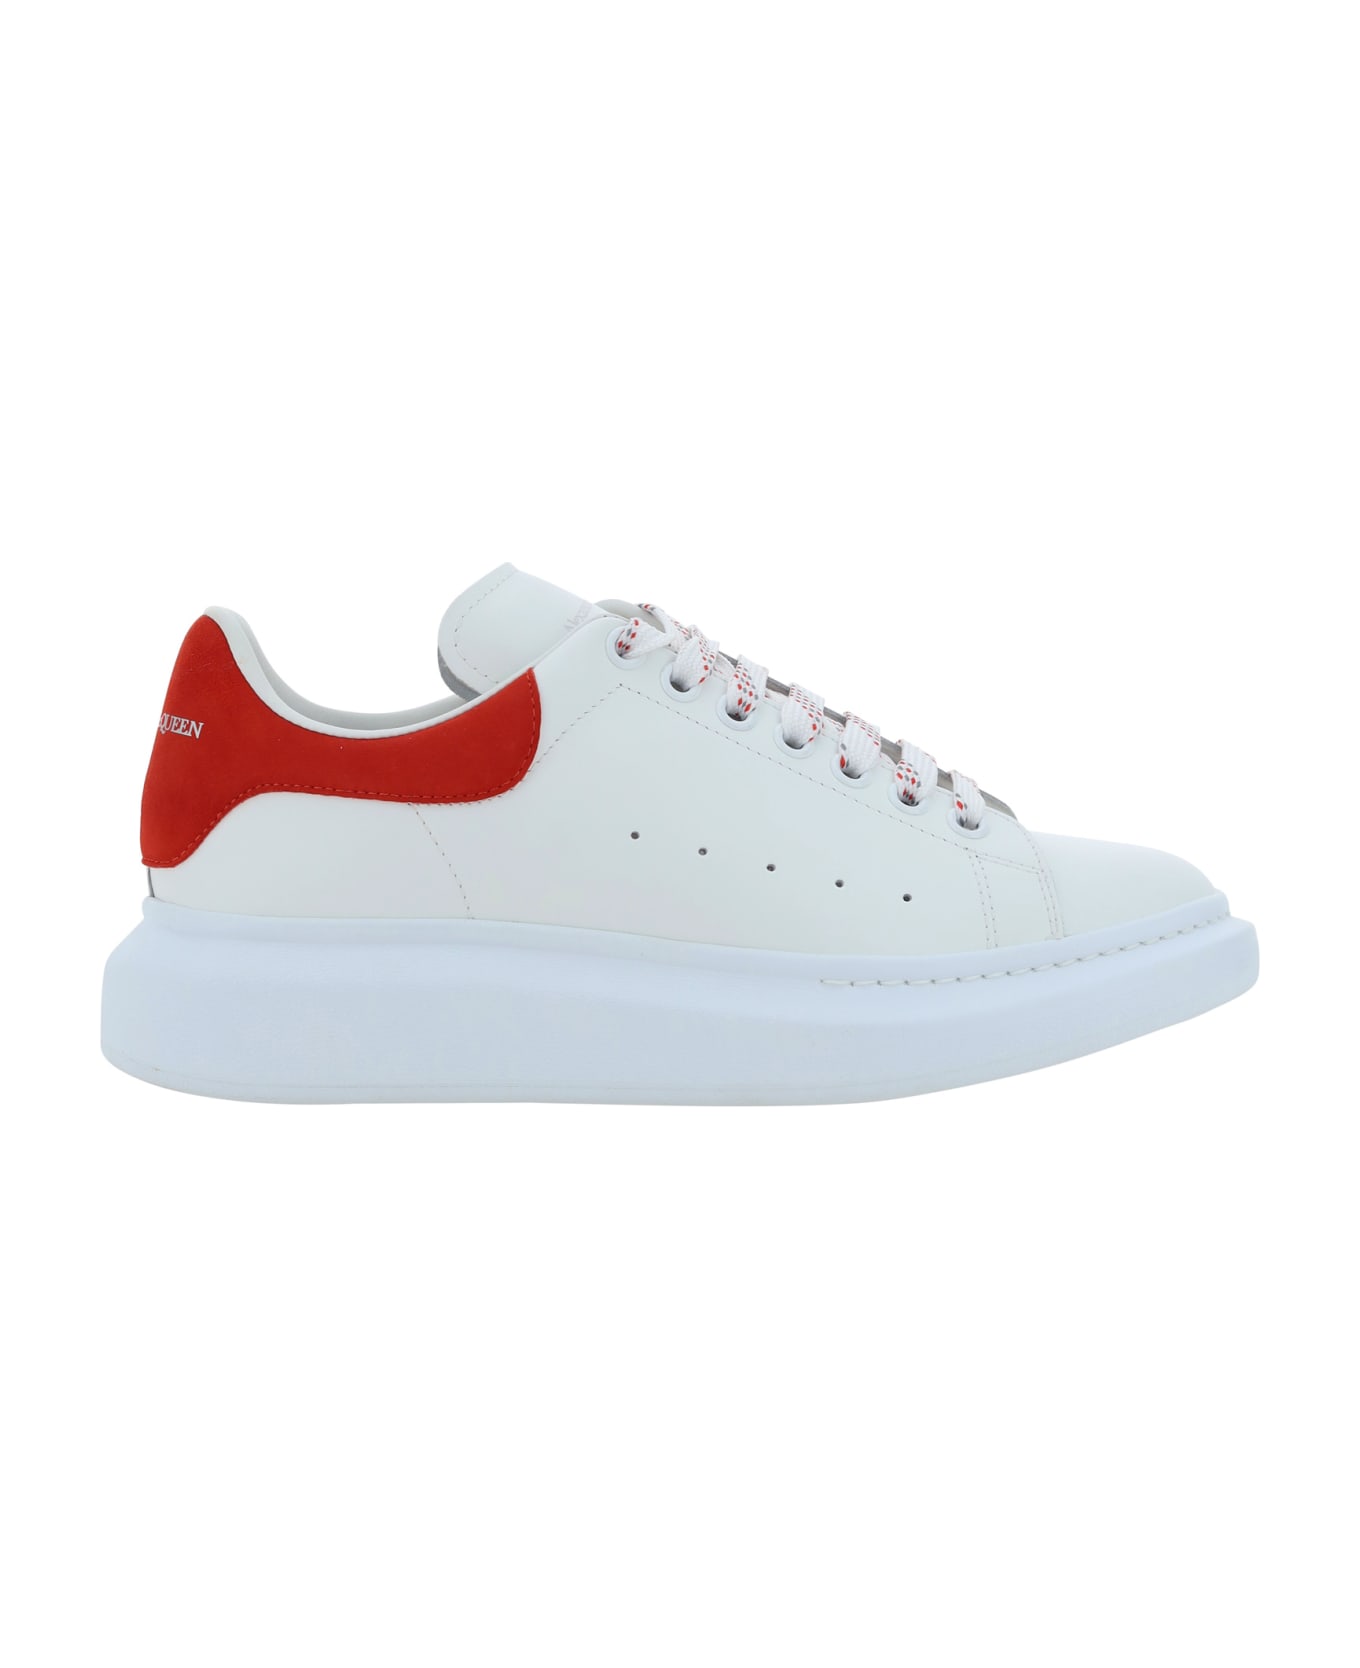 Alexander McQueen Sneakers - White/lust Red